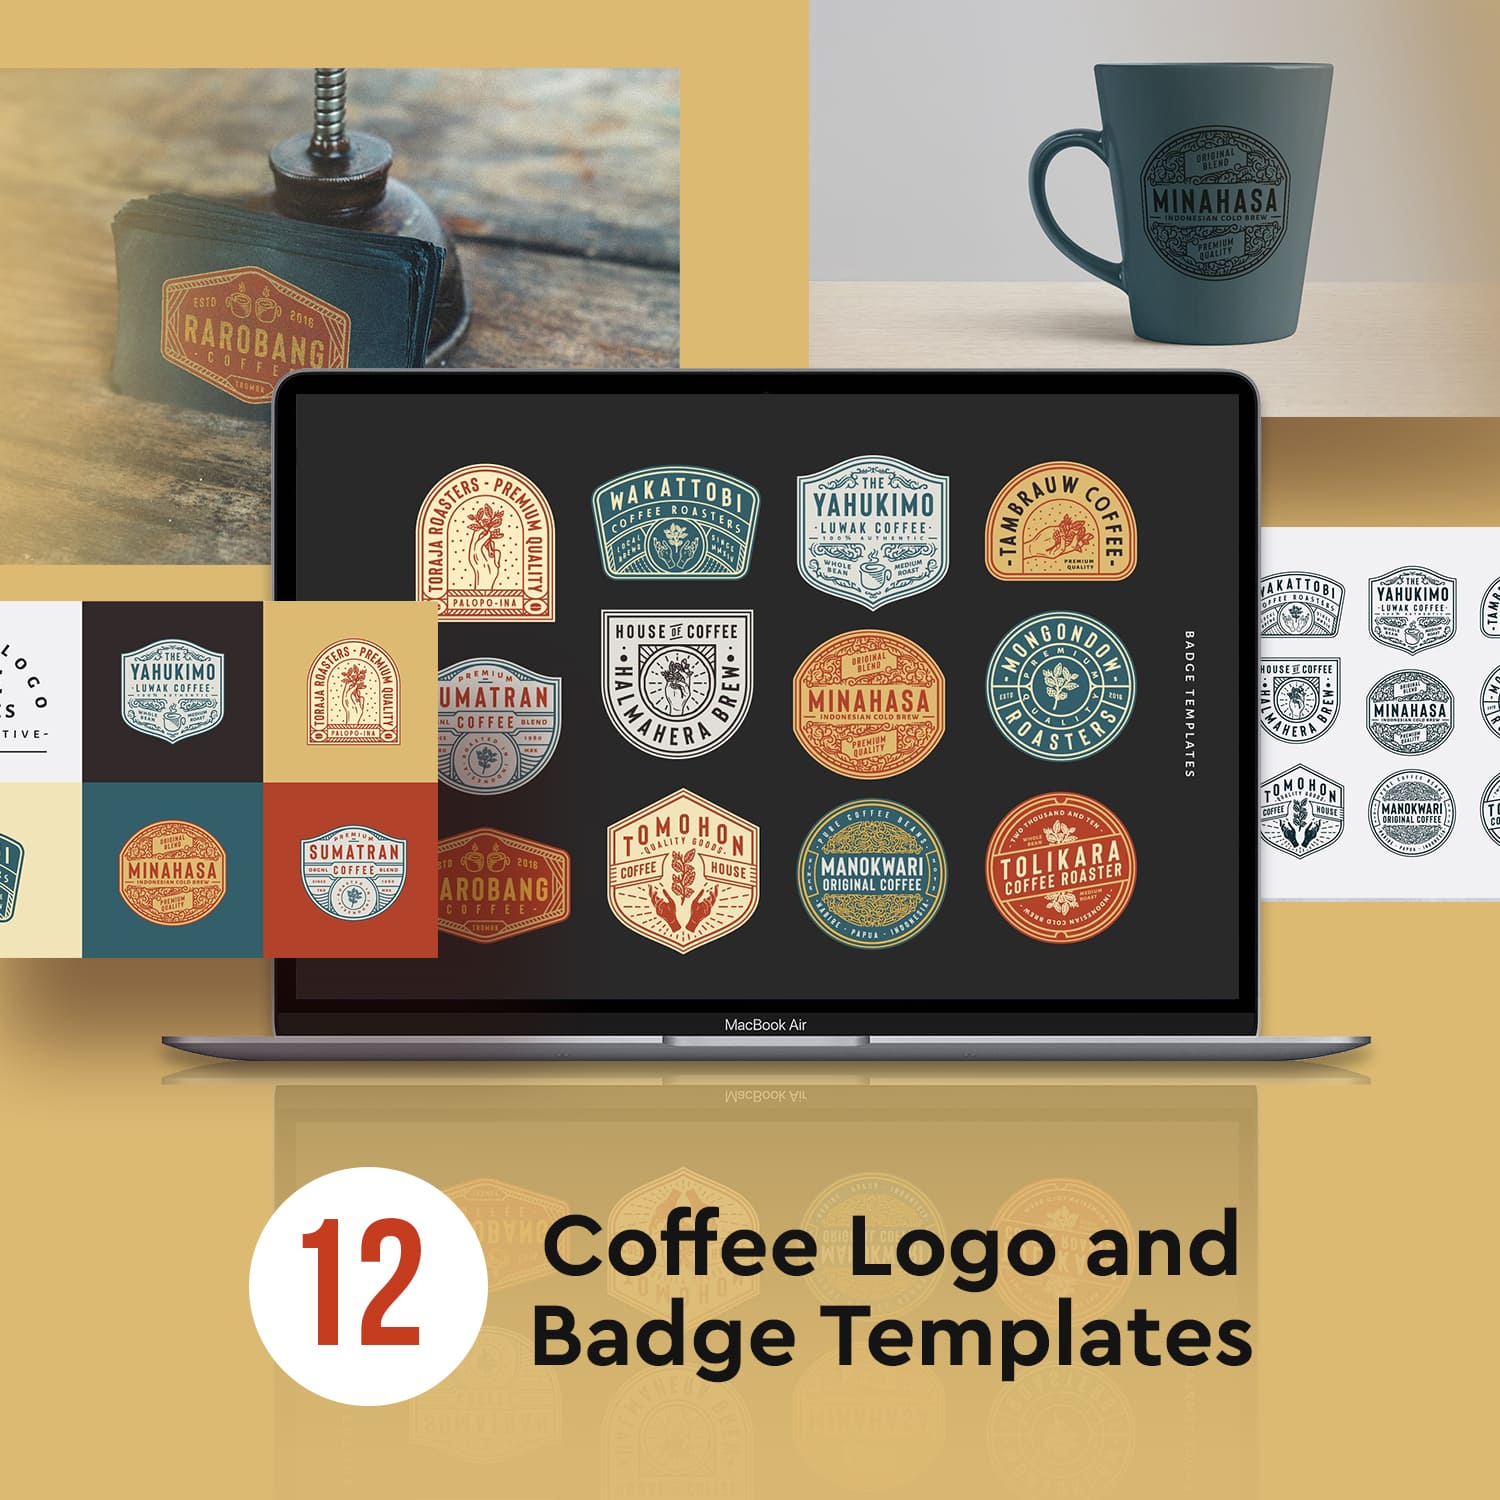 12 coffee logo and badge templates cover image.